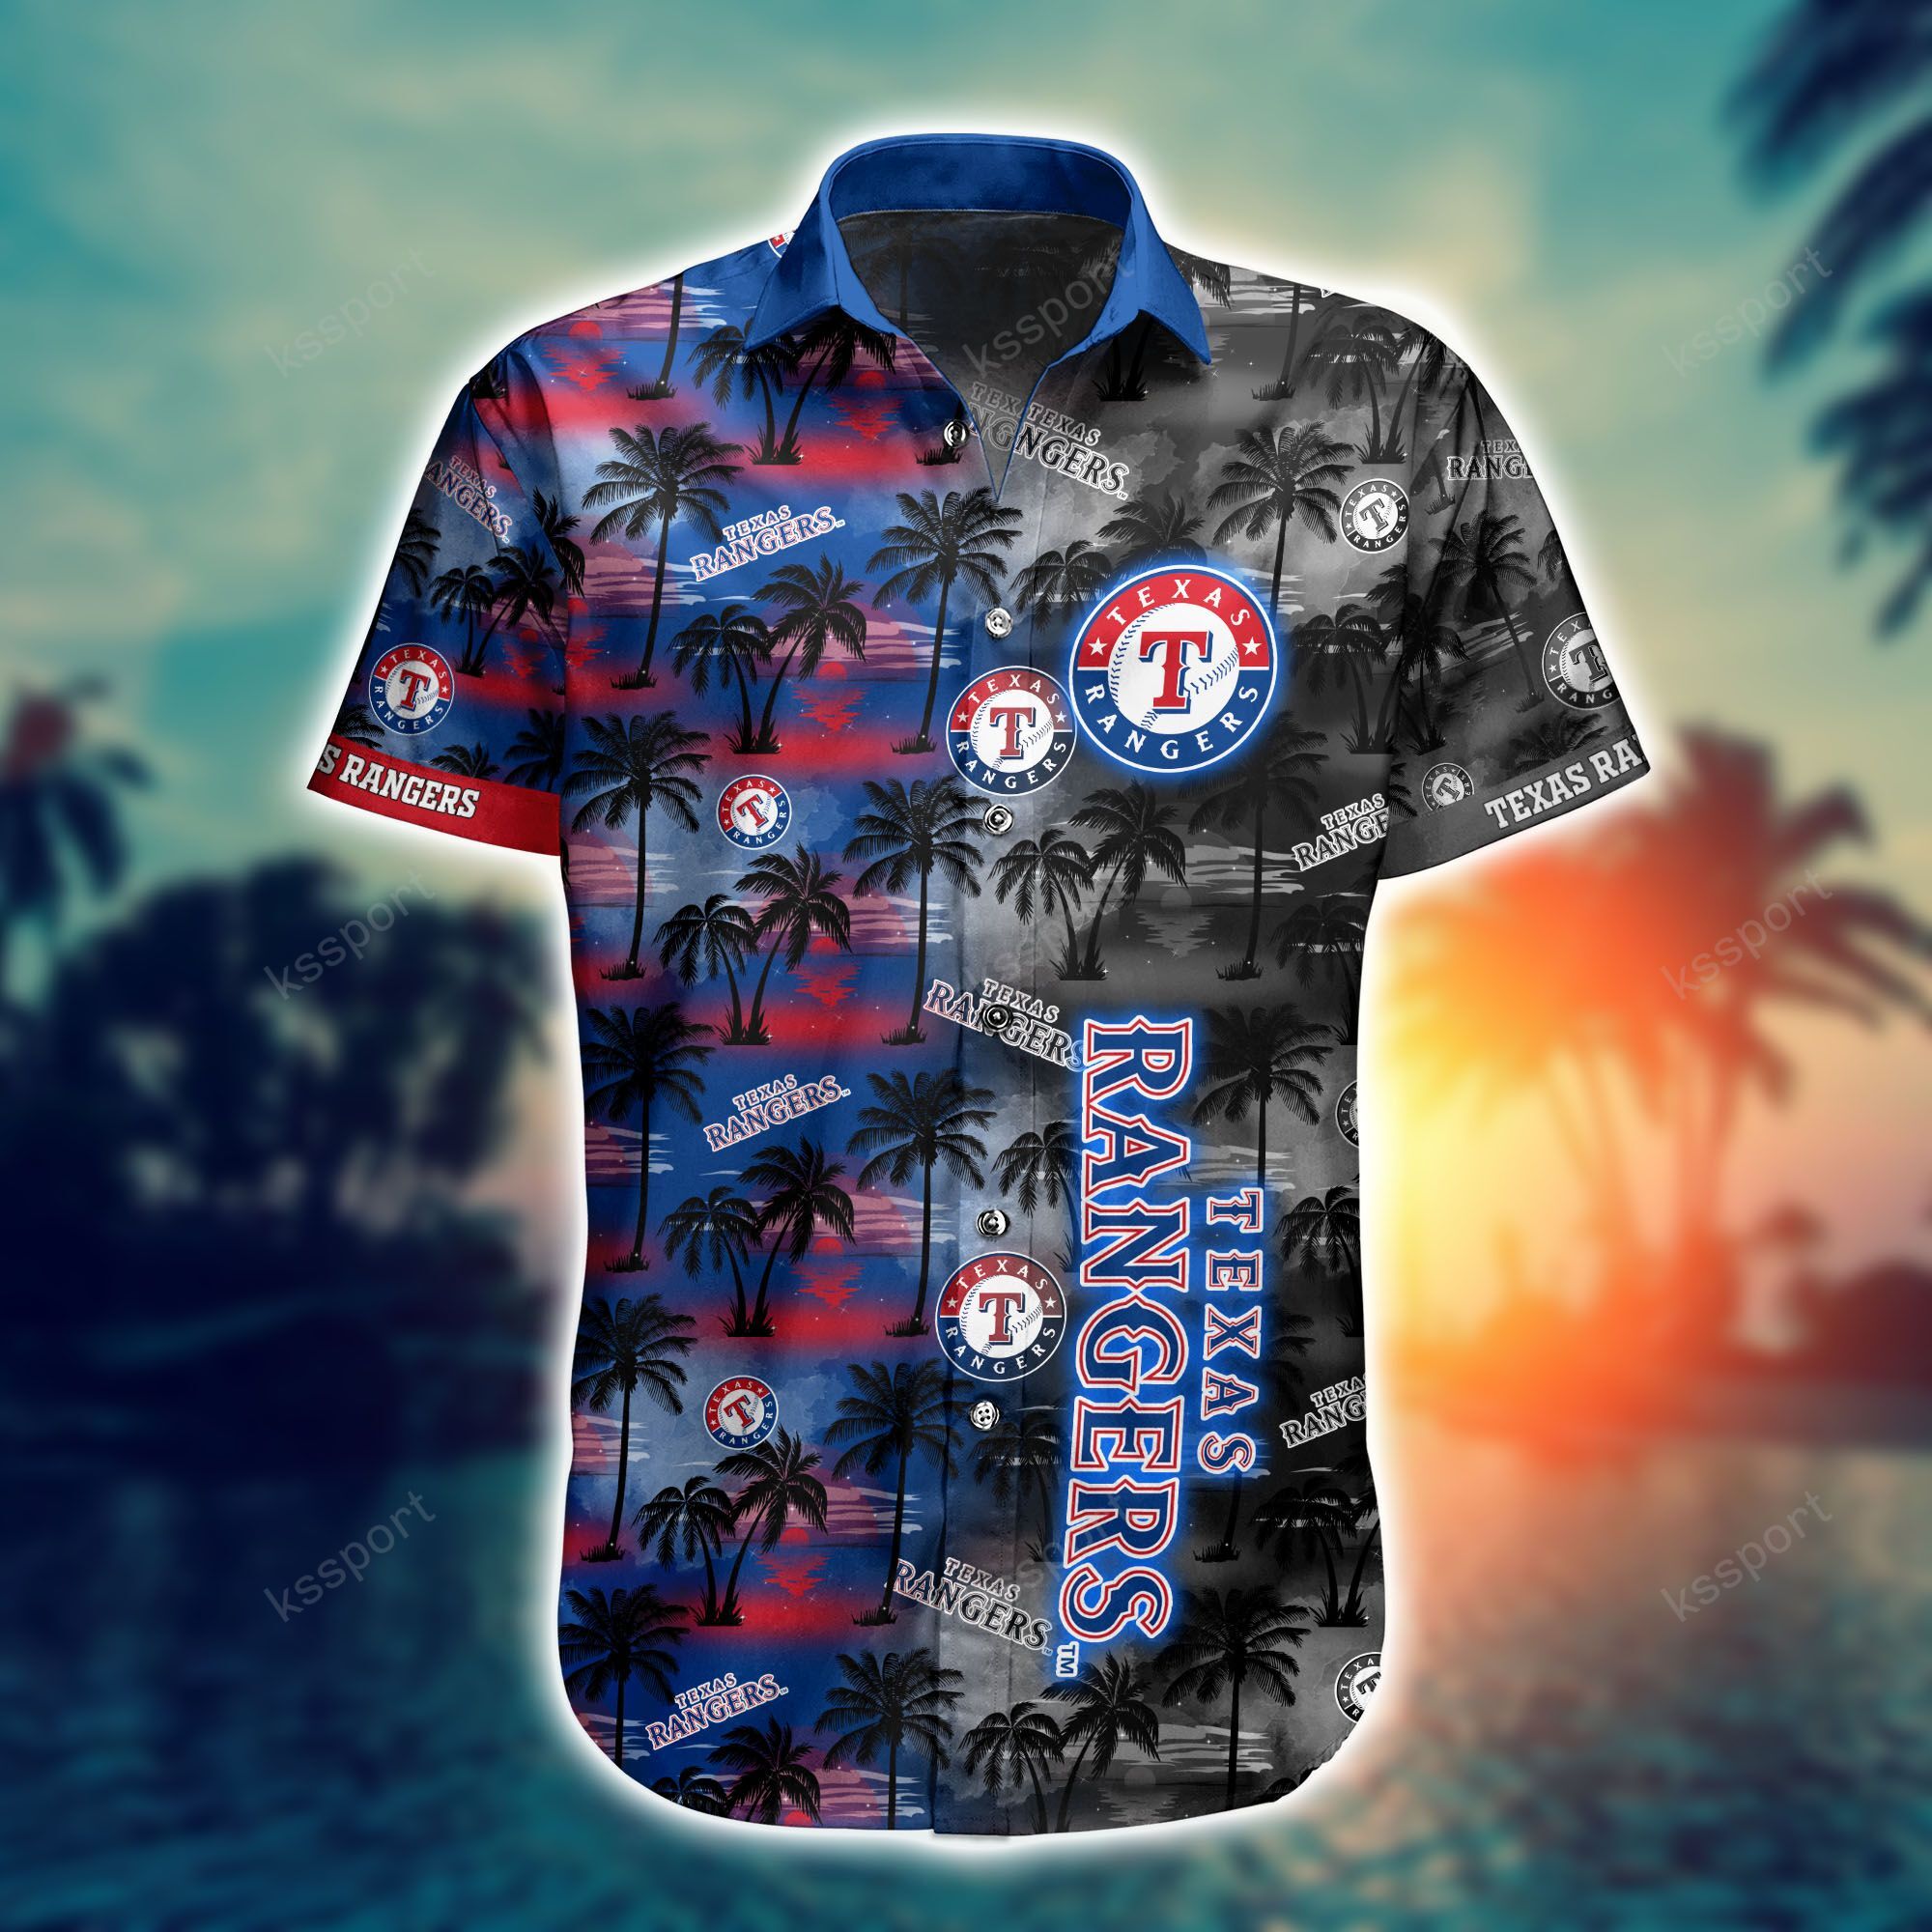 Top cool Hawaiian shirt 2022 - Make sure you get yours today before they run out! 221